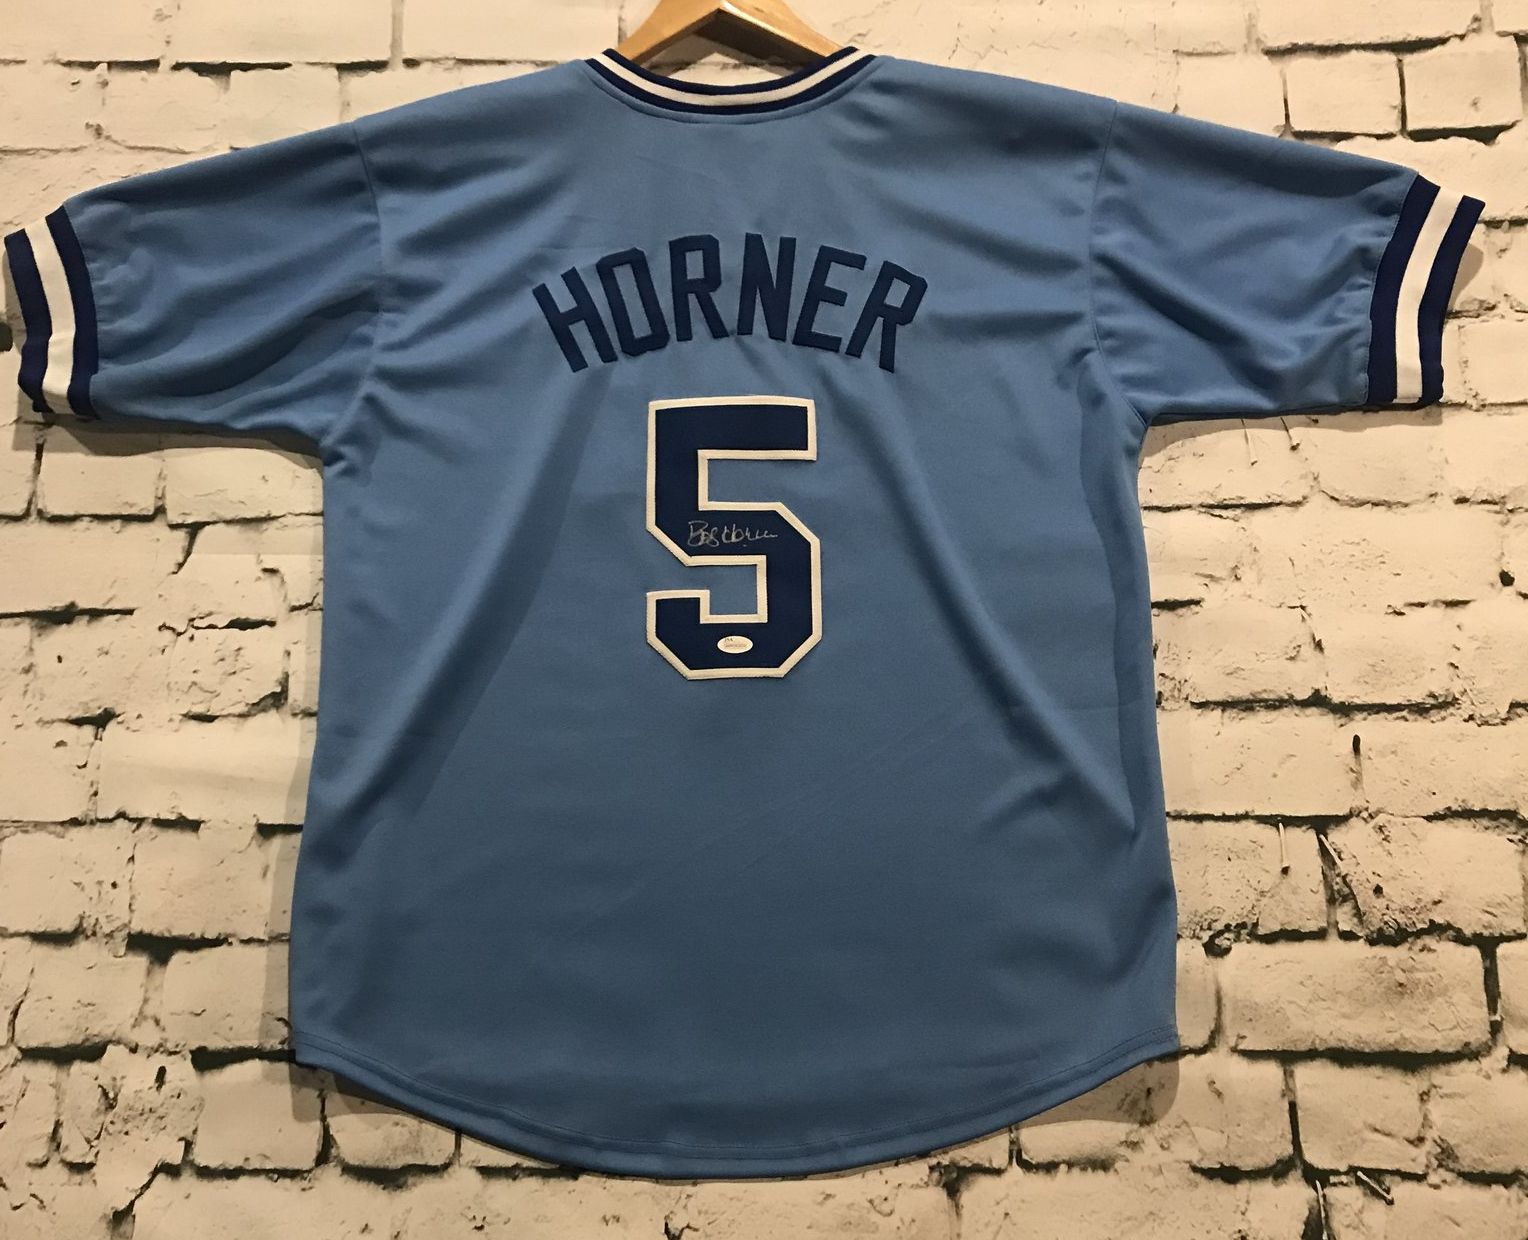 Goat Jerseys on X: Bob Horner has a birthday today⚾️ Look at